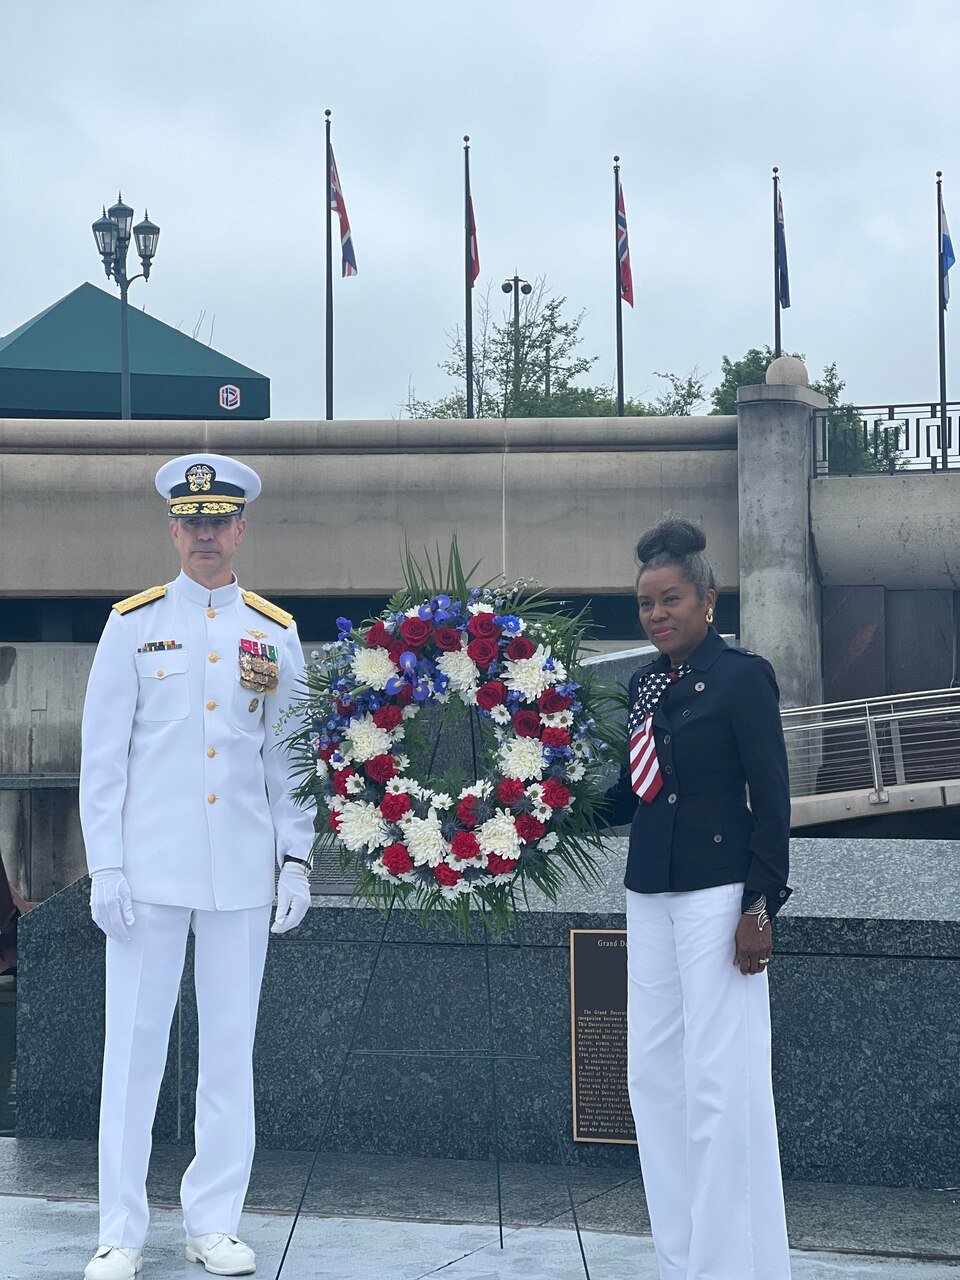 Rear Adm. Michael Steffen, Commander, Navy Reserve Forces Command, returned to his hometown to serve as the keynote speaker at the National D-Day Memorial’s observance event for Memorial Day, May 29, where hundreds of people gathered to honor and remember the men and women who died while serving in the U.S. military.